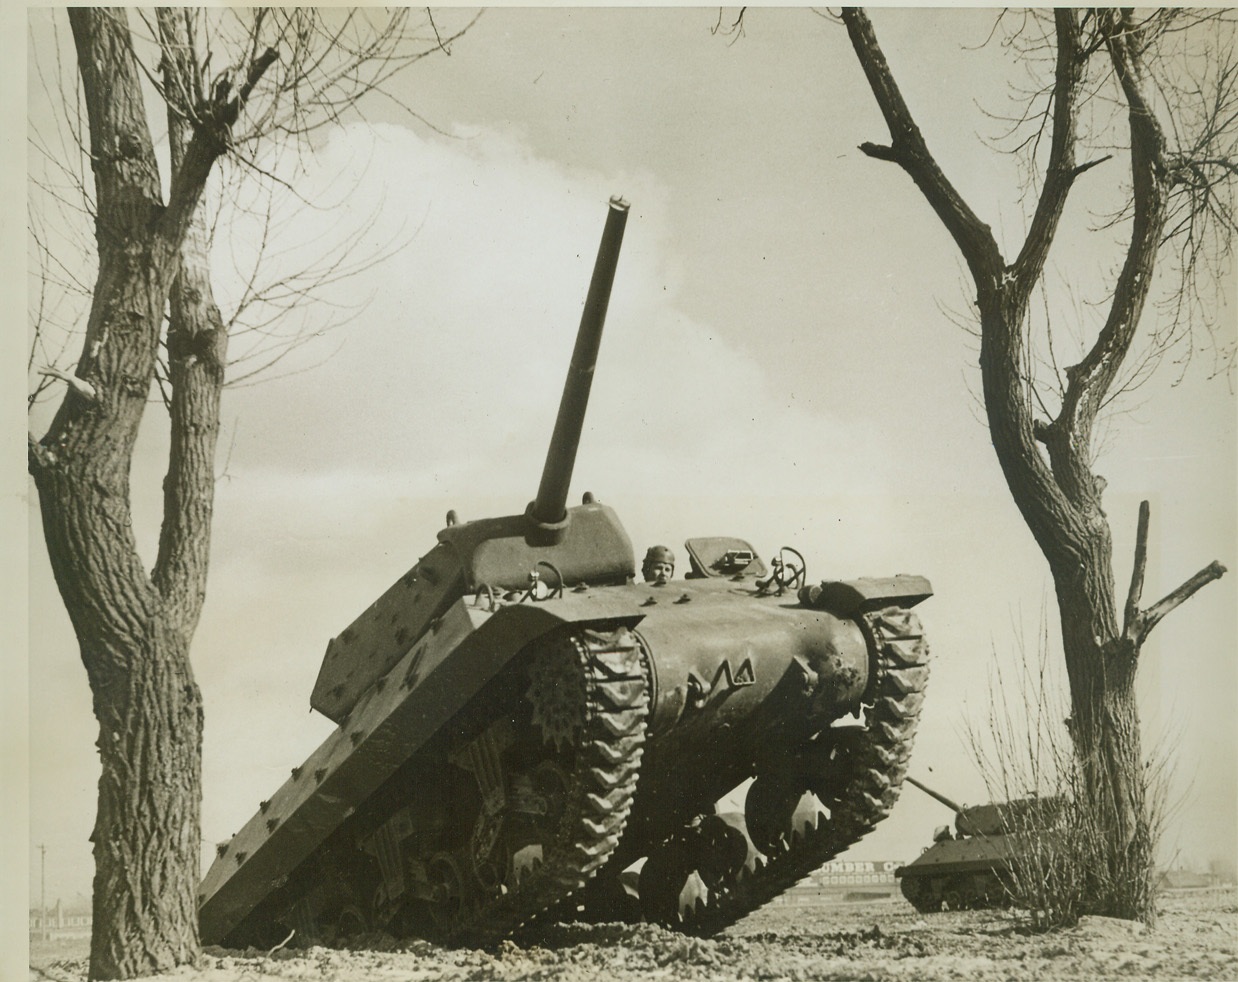 New Tank Busters Go Through Their Paces, 3/14/1943. DETROIT, MICH. – Two new M-10 tank destroyers go through a stiff workout on the Ford Motor Co. test grounds. Stripped of many of the engineering refinements found on the medium tank in order to gain speed (they both come off the same production line). The M-10 packs a greater wallop with its 3-inch gun. Credit: (ACME);